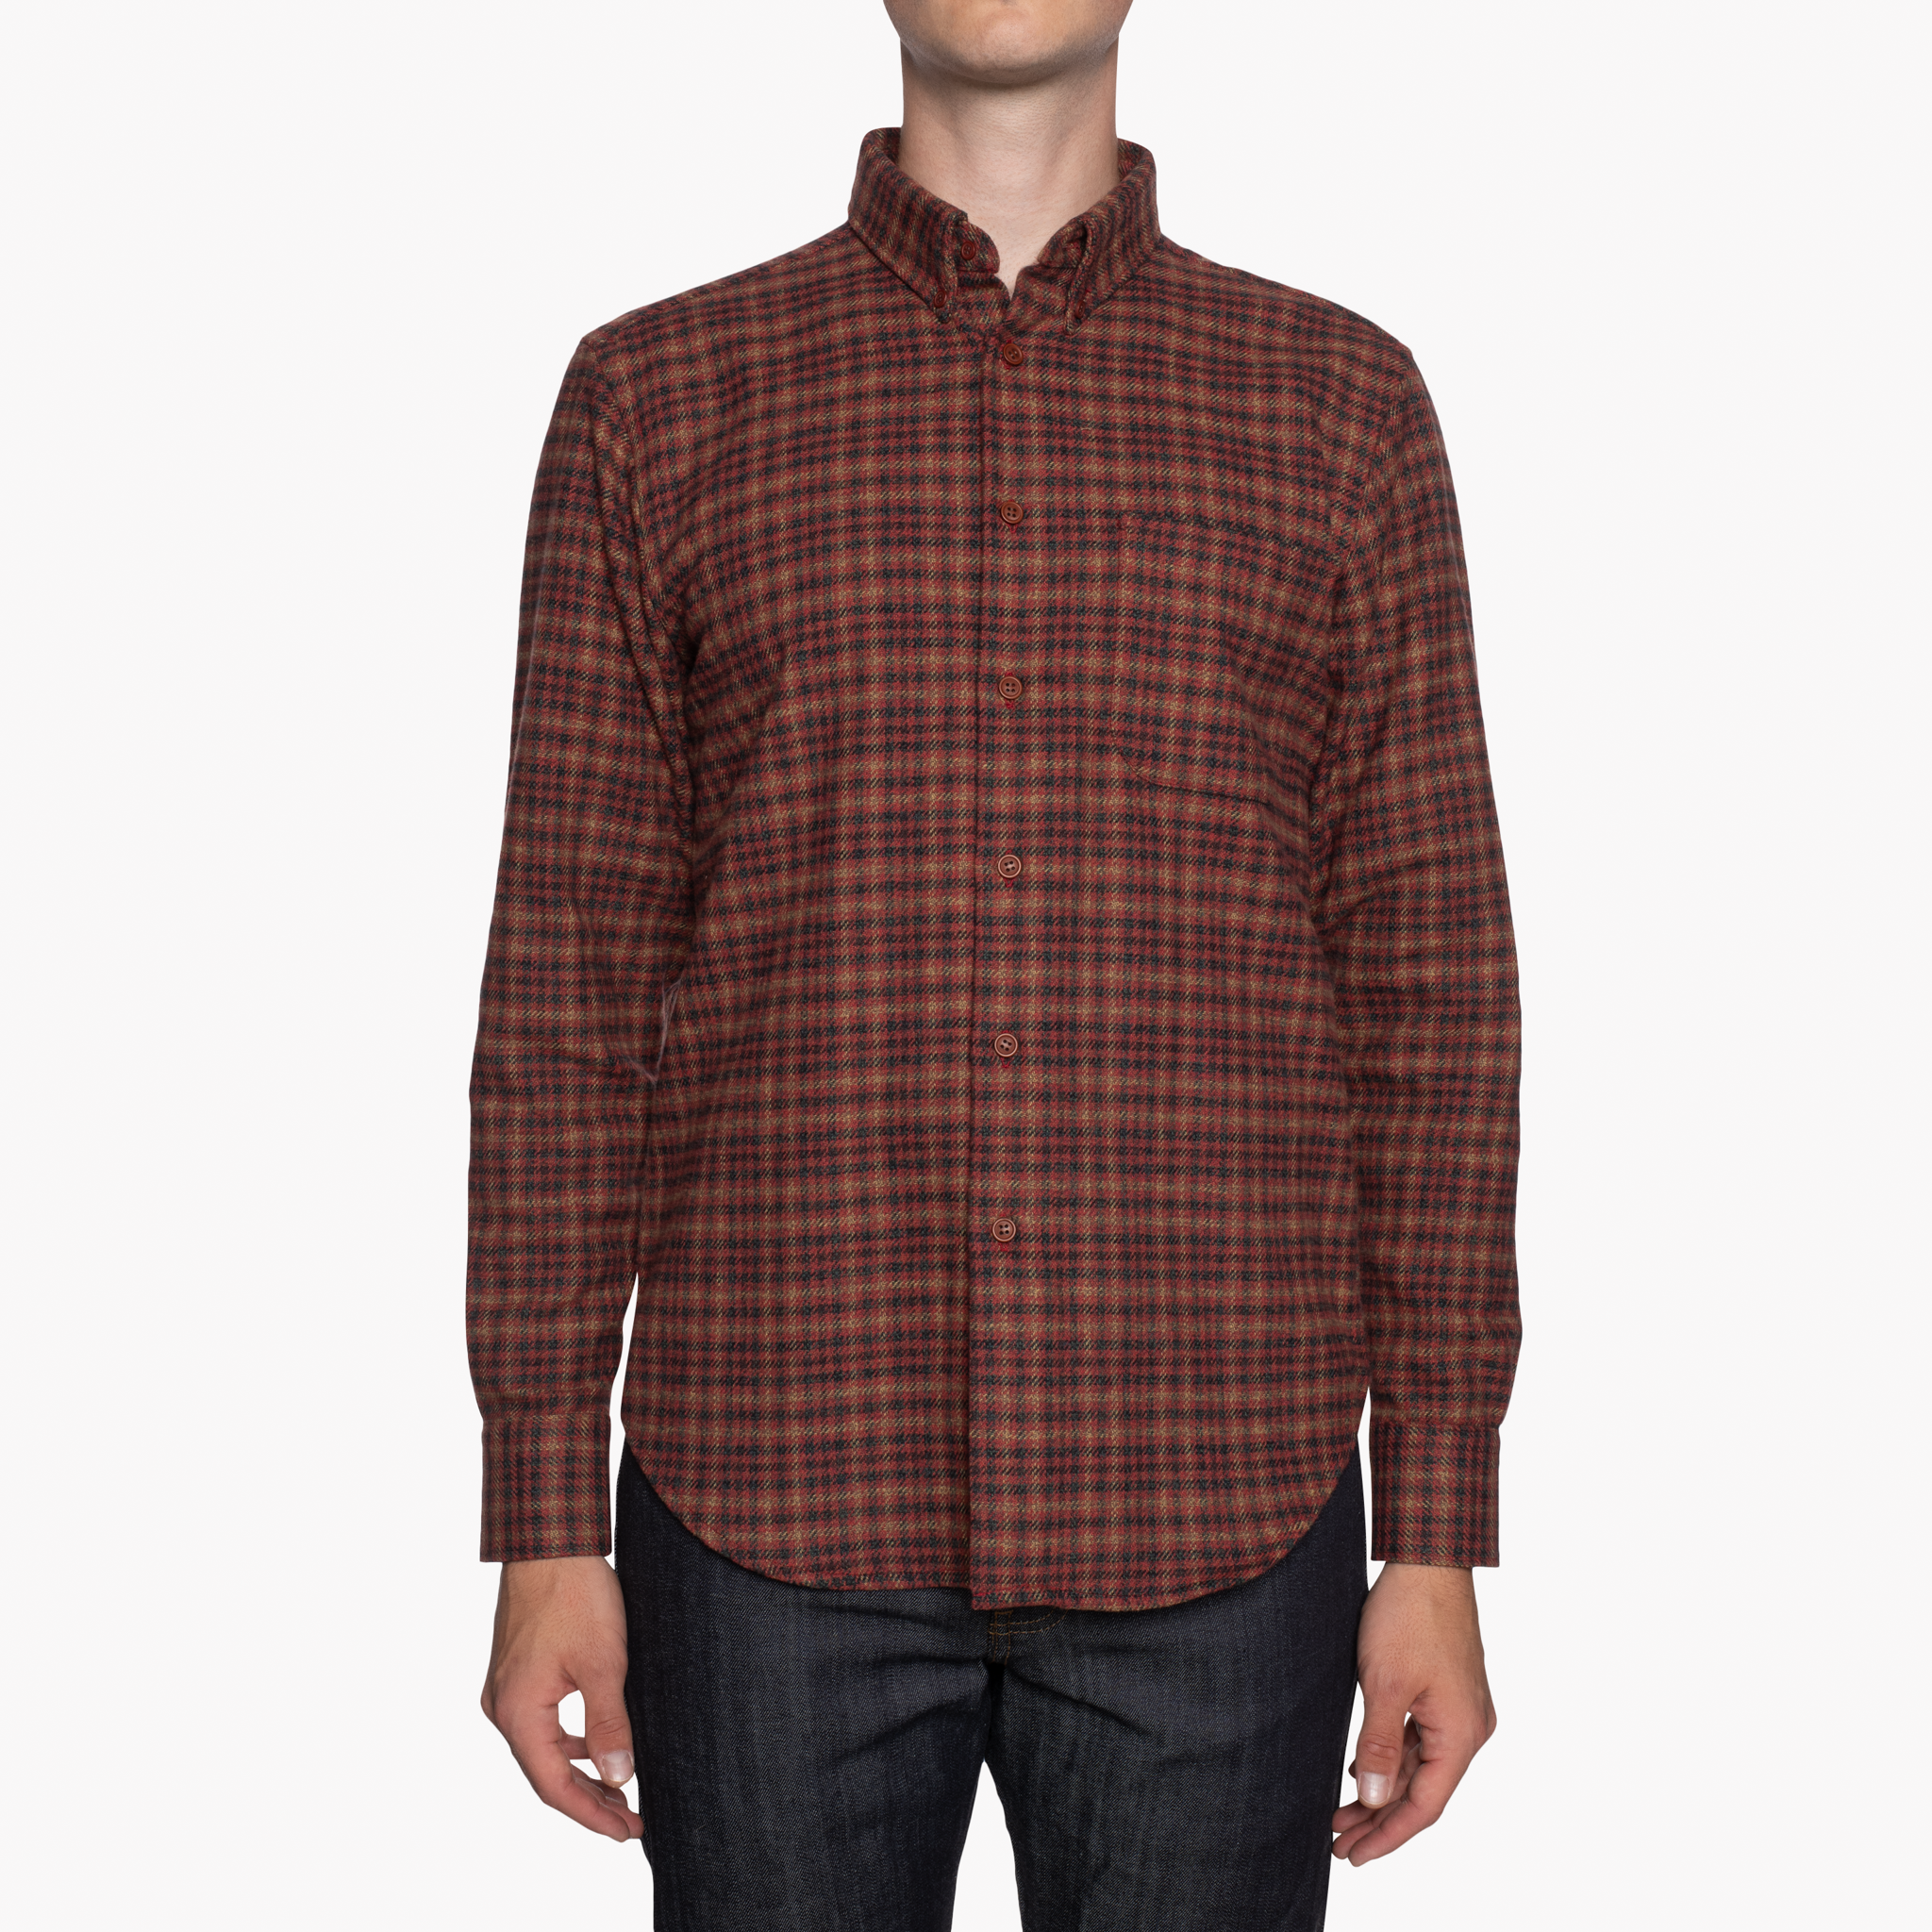  Easy Shirt - Heavy Vintage Flannel - Red - front 